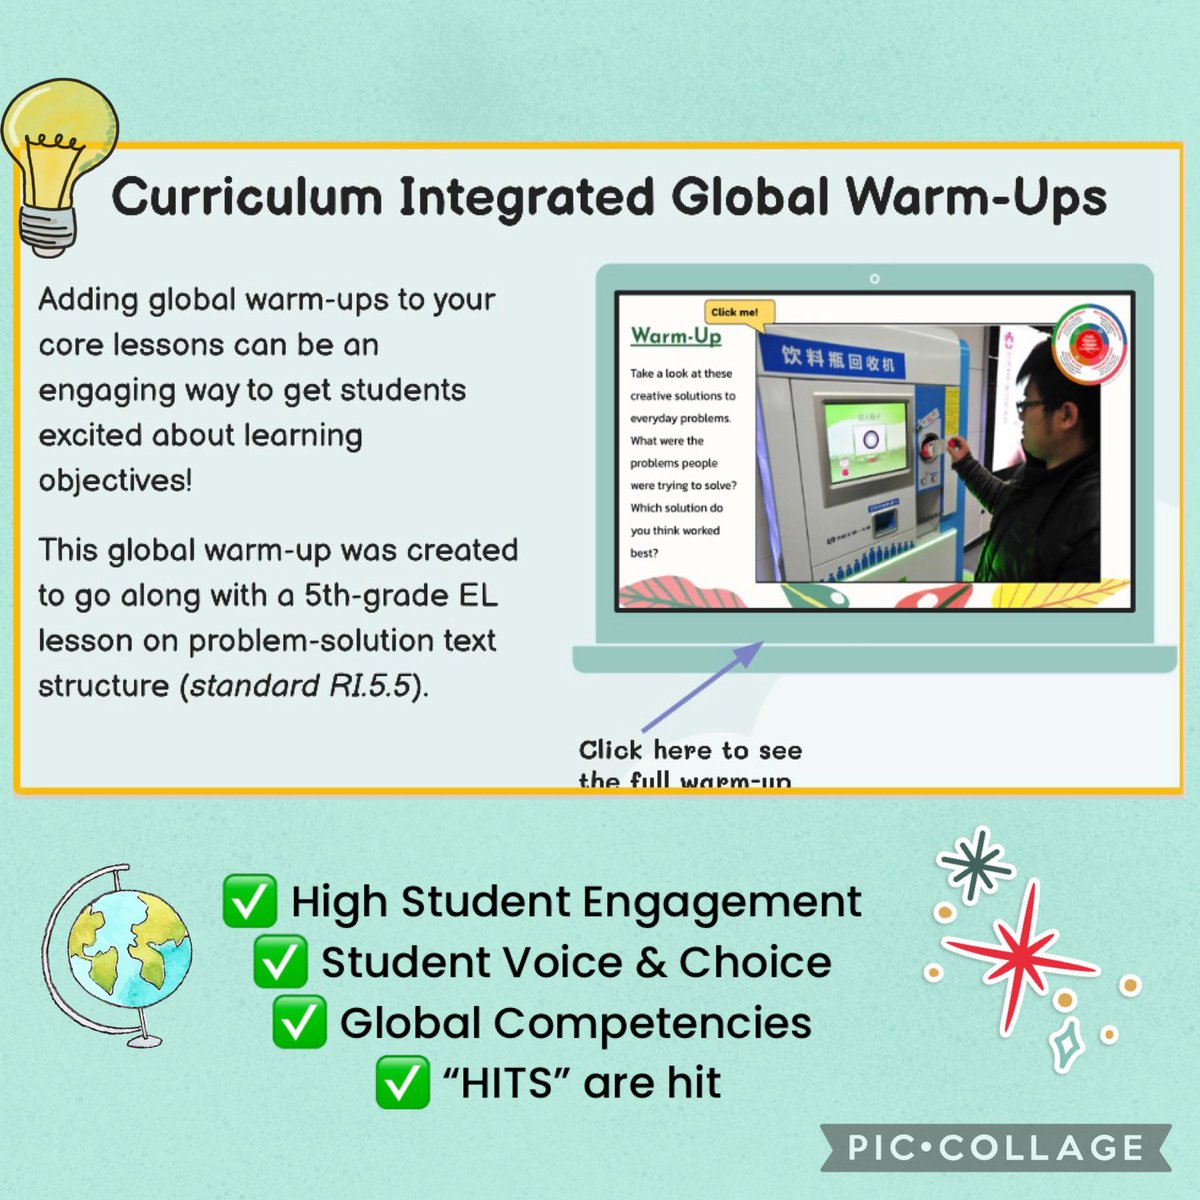 Our Friyay Staff Meeting was filled with lots of teaching strategies and best practices in Spanish Immersion, ESL & AIG! We also learned about the benefits of Global Warm Ups to boost student engagement! Way to go team DDMES! #ReadySetSOAR!